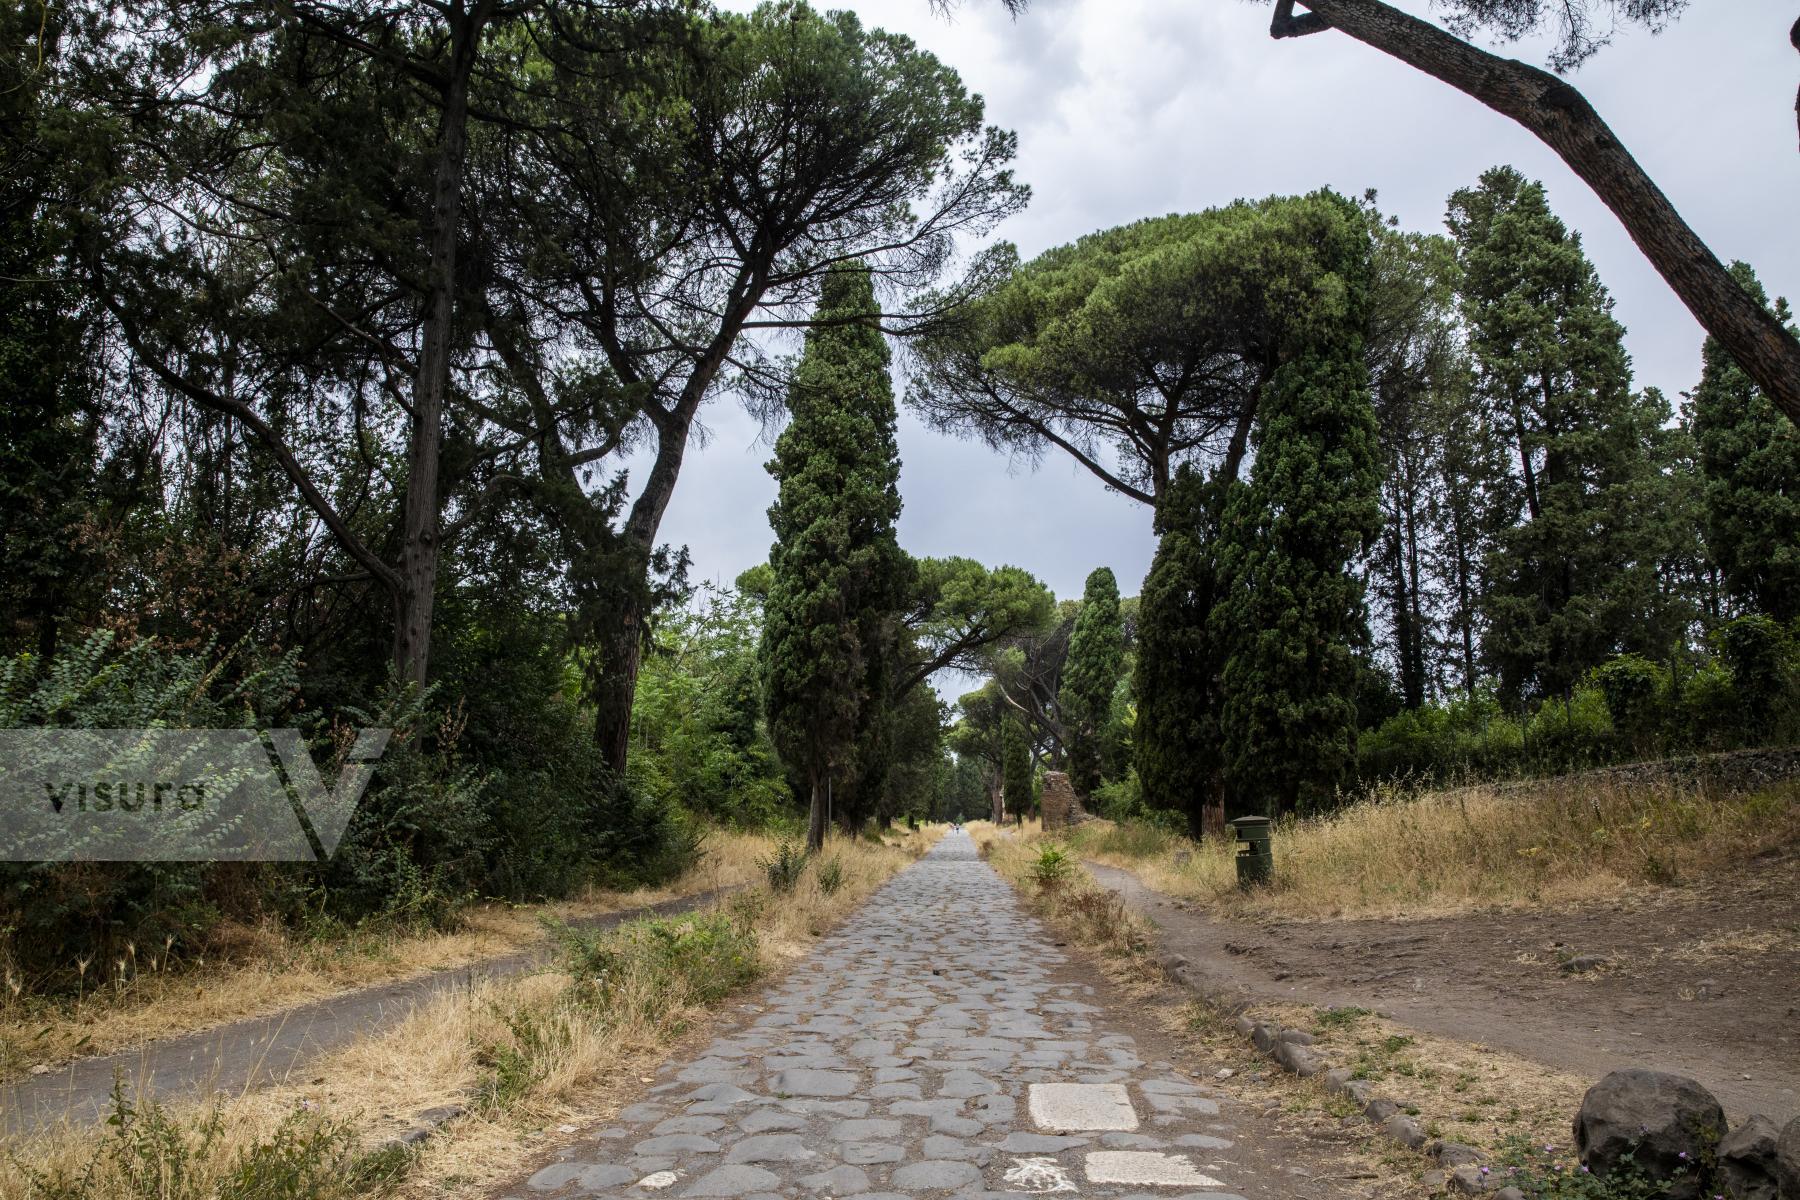 Purchase The Appian Way - Europe's First Superhighway by Katie Linsky Shaw